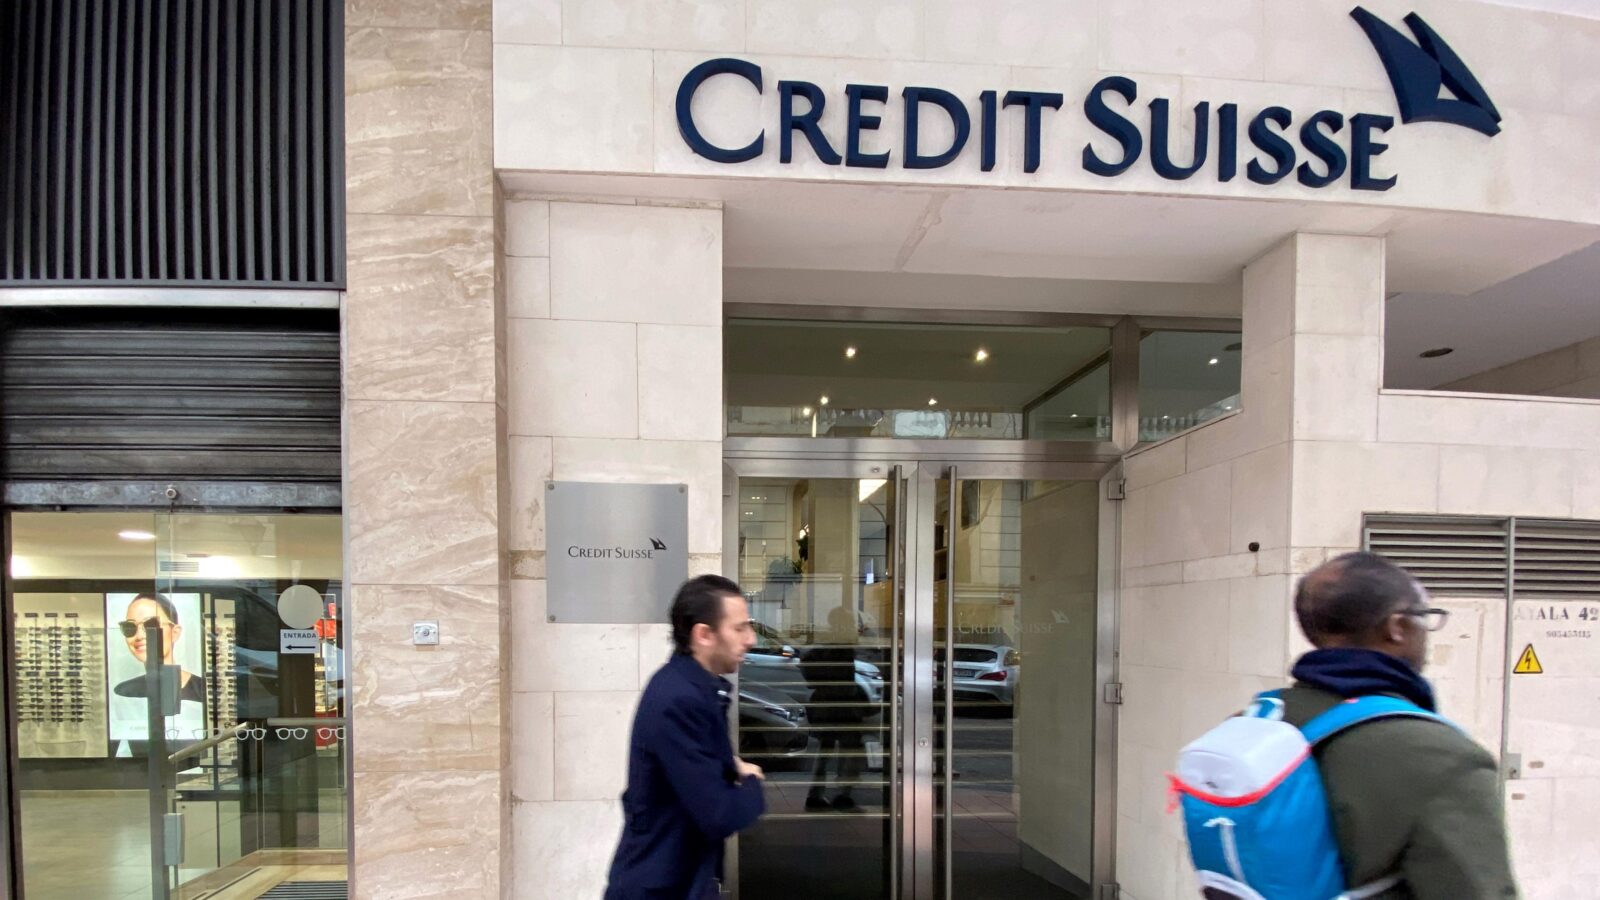 Credit Suisse has applied for a licence to set up an